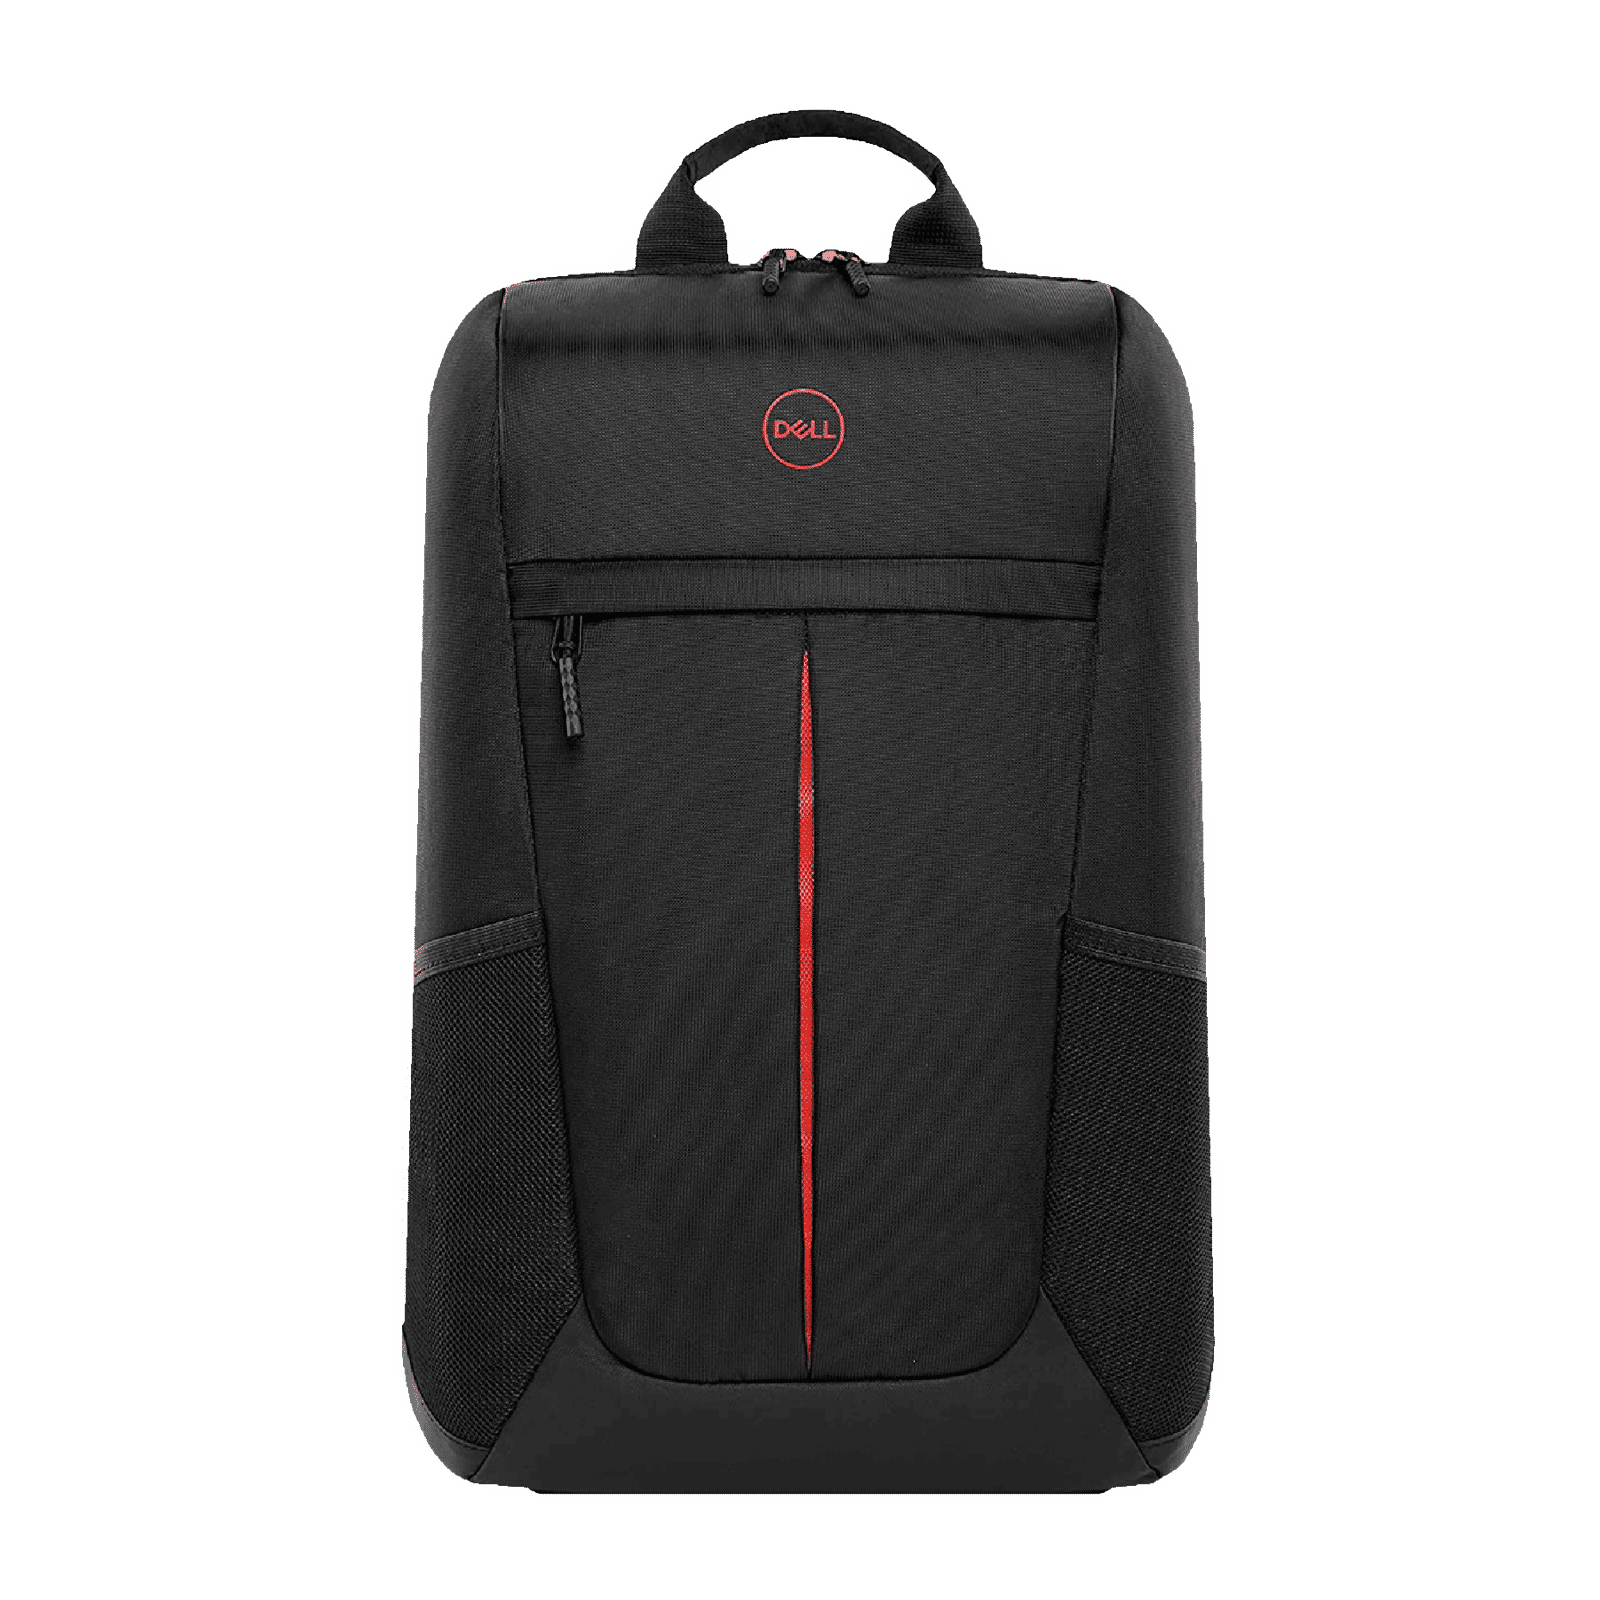 17inch gaming laptop bag! Authentic Asus TUF gaming laptop bag, Computers &  Tech, Parts & Accessories, Laptop Bags & Sleeves on Carousell